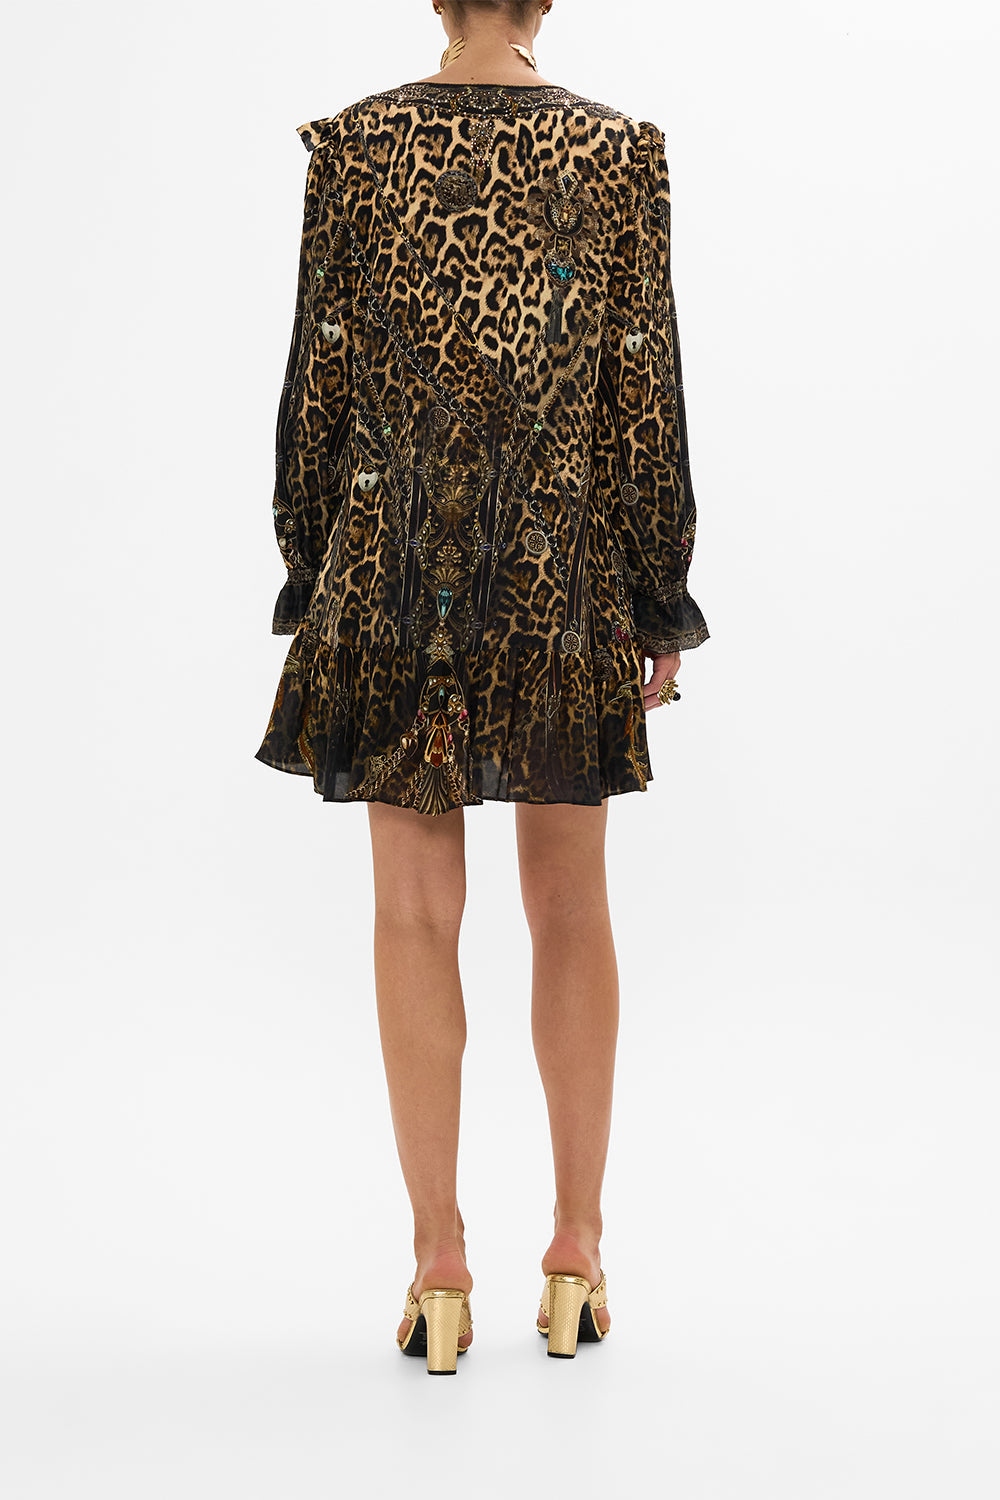 CAMILLA Leopard Ruffle Lace Up Dress in Amsterglam